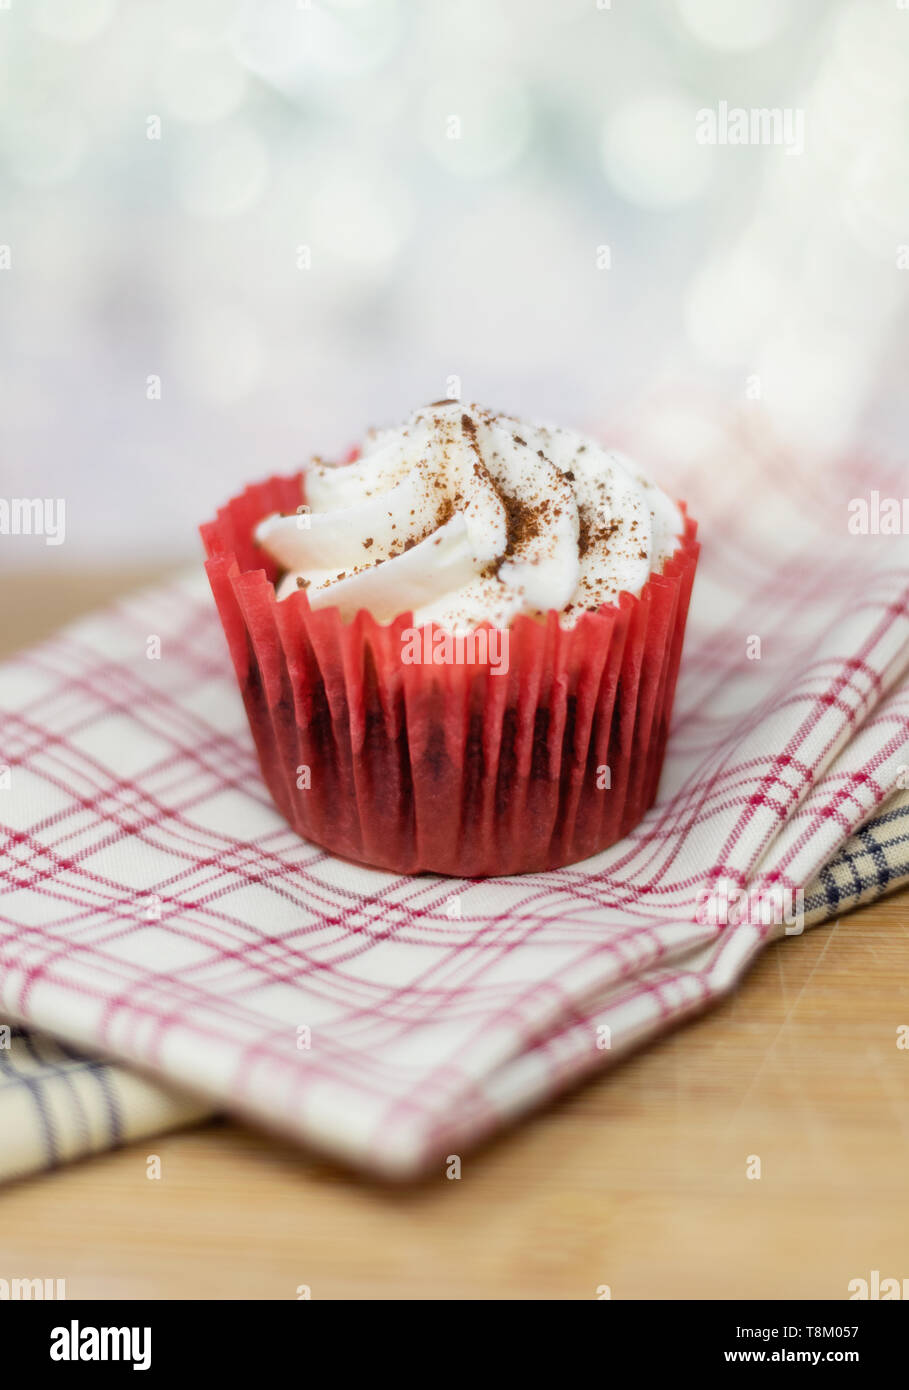 Red velvet cupcake on decorative plaid cloth with a shallow depth of field and a bokeh background Stock Photo